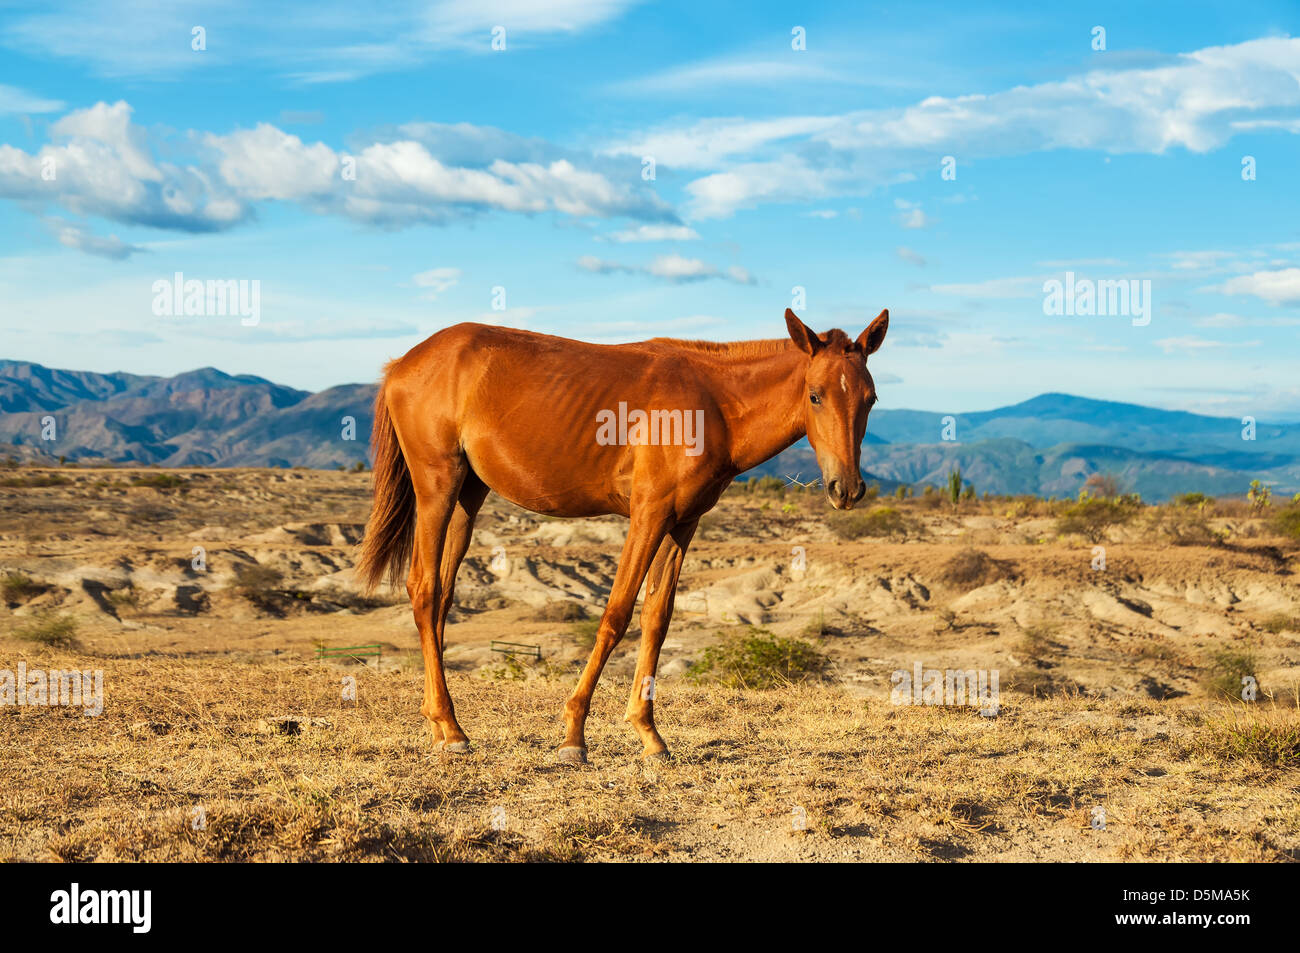 Young horse in a desert bathed in early morning sunlight Stock Photo